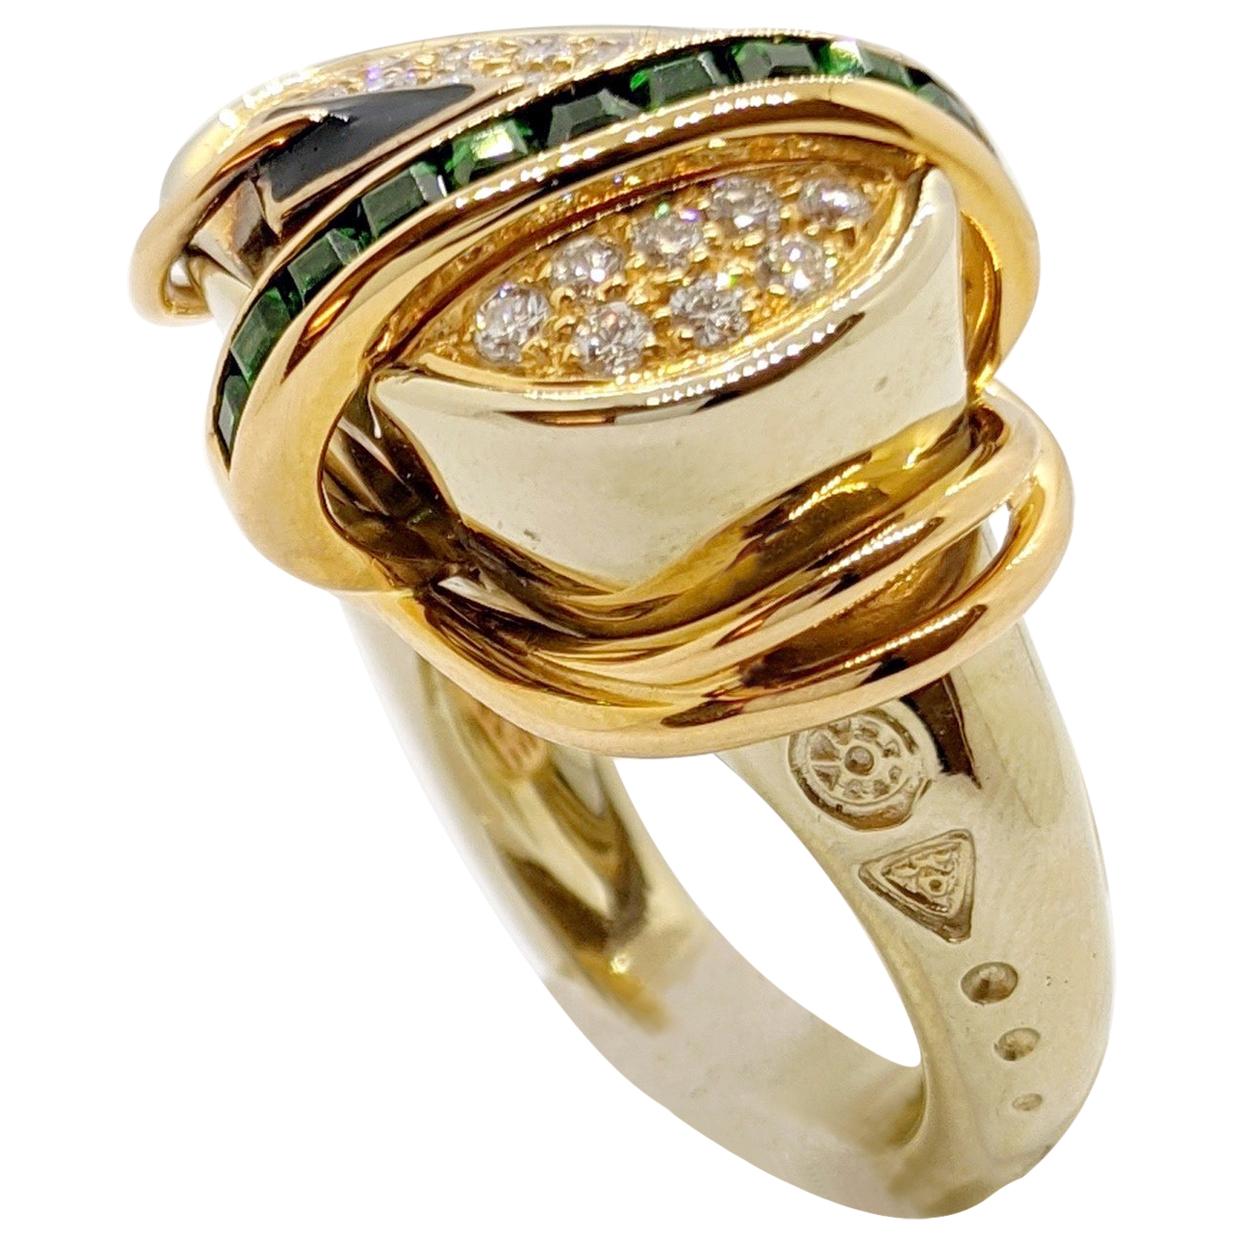 La Nouvelle Bague 18 Karat Rose and White Gold Ring, with Diamonds and Tsavorite